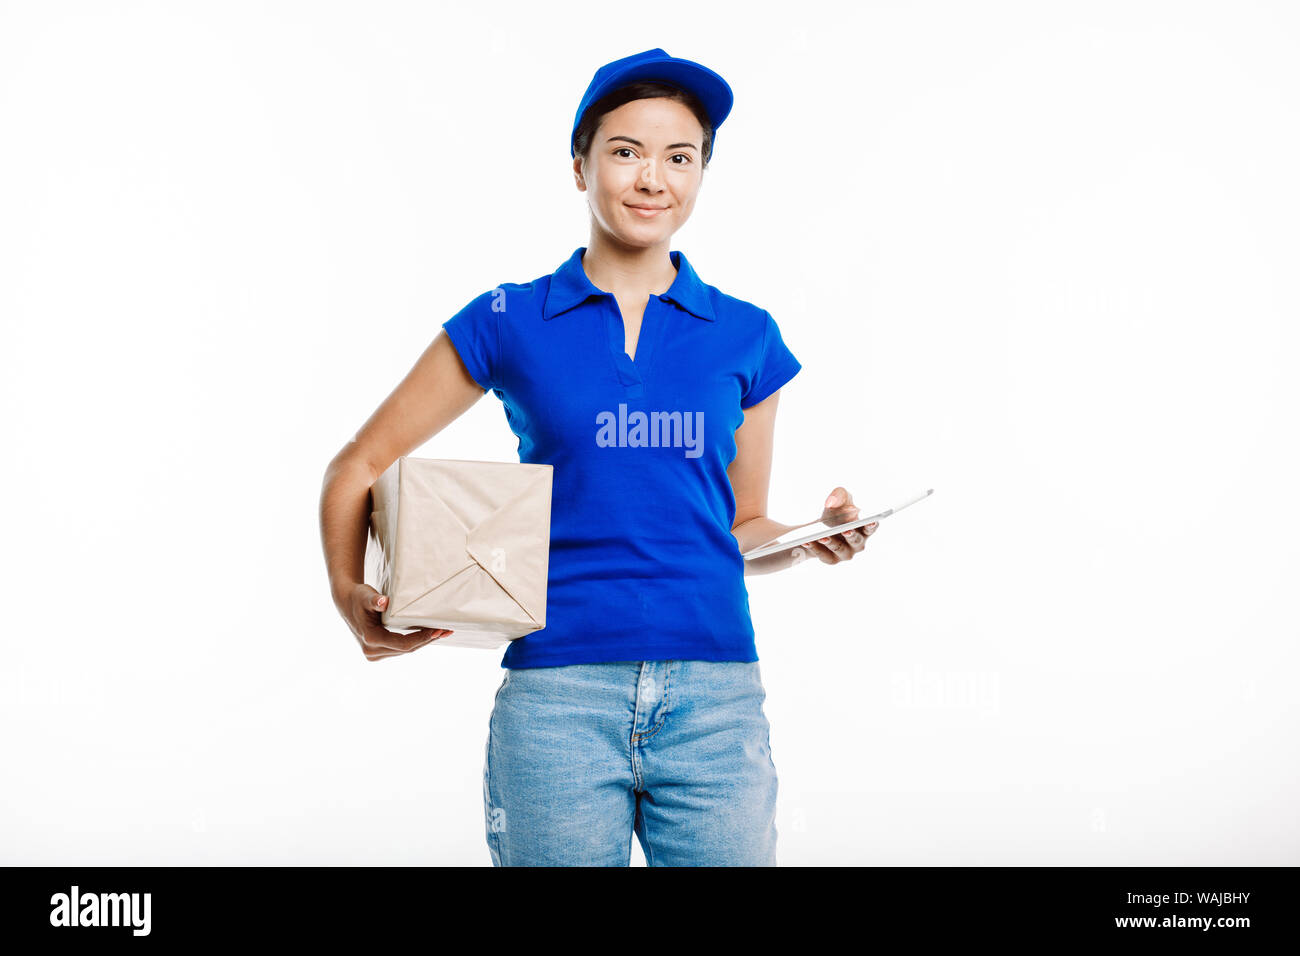 Postman in the blue uniform poses at the camera with a parcel and a tablet on the white background. Stock Photo